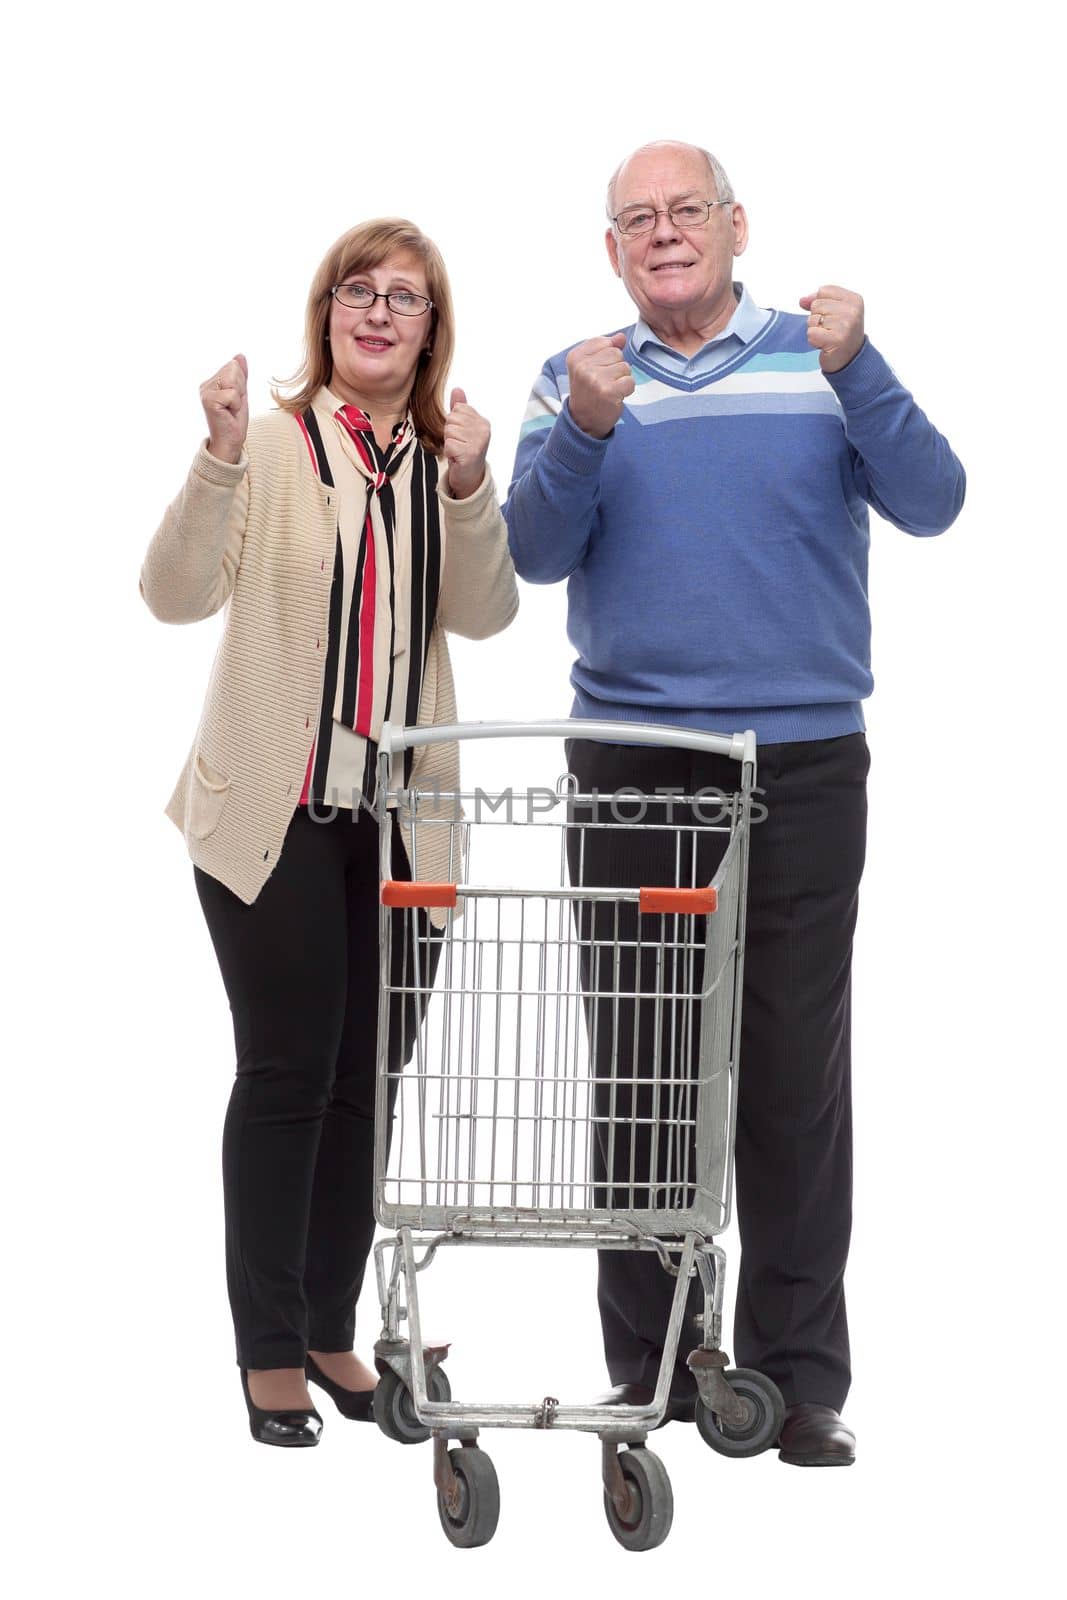 in full growth. casual elderly couple with shopping cart by asdf